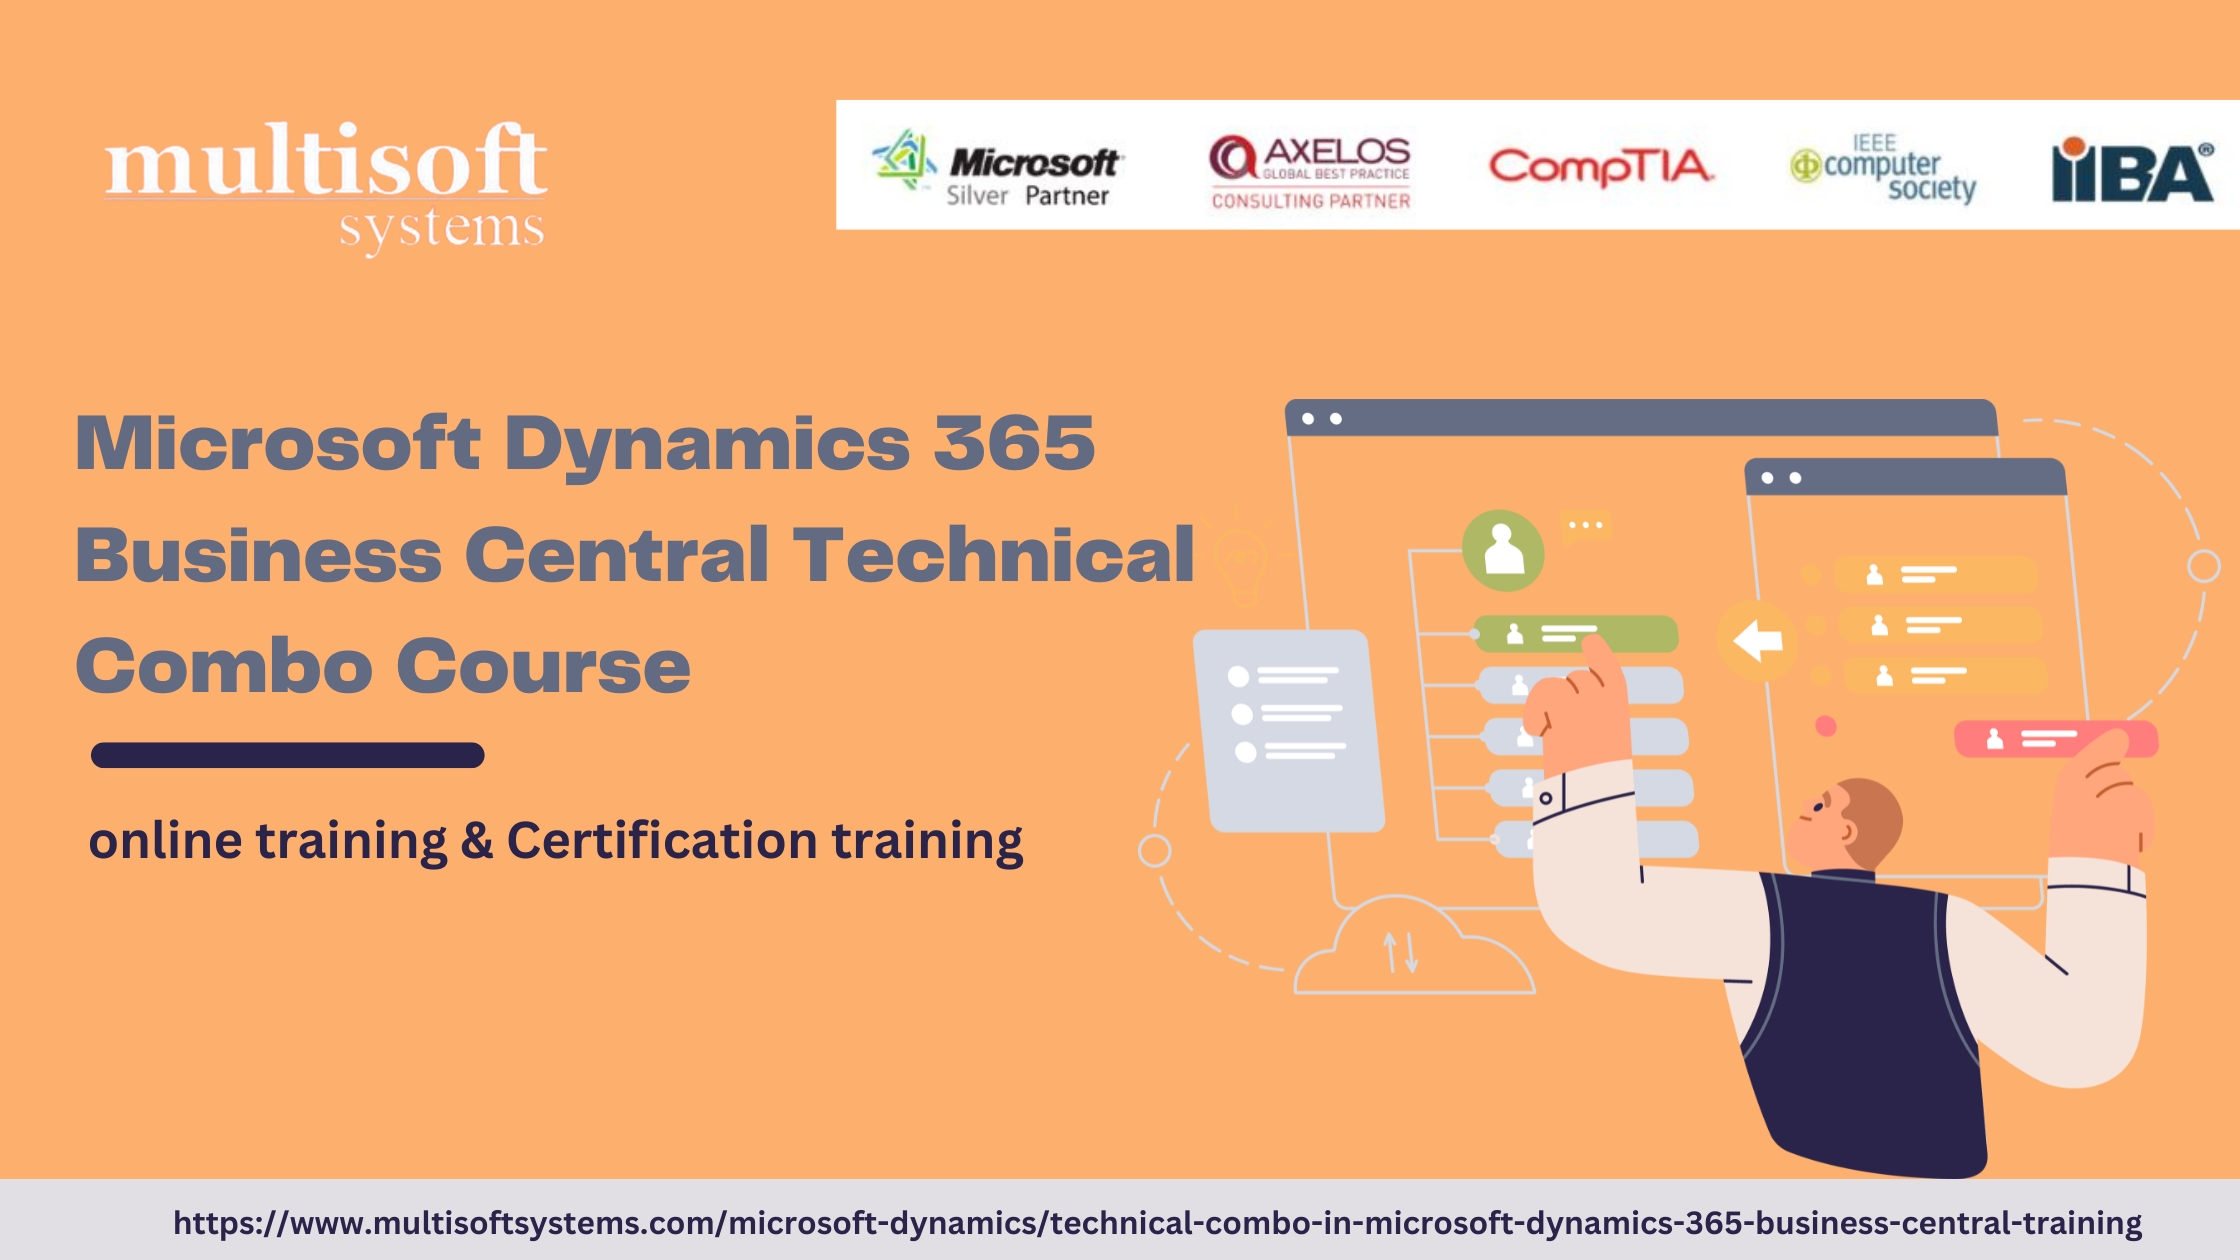 Microsoft Dynamics 365 Business Central Technical Combo Training